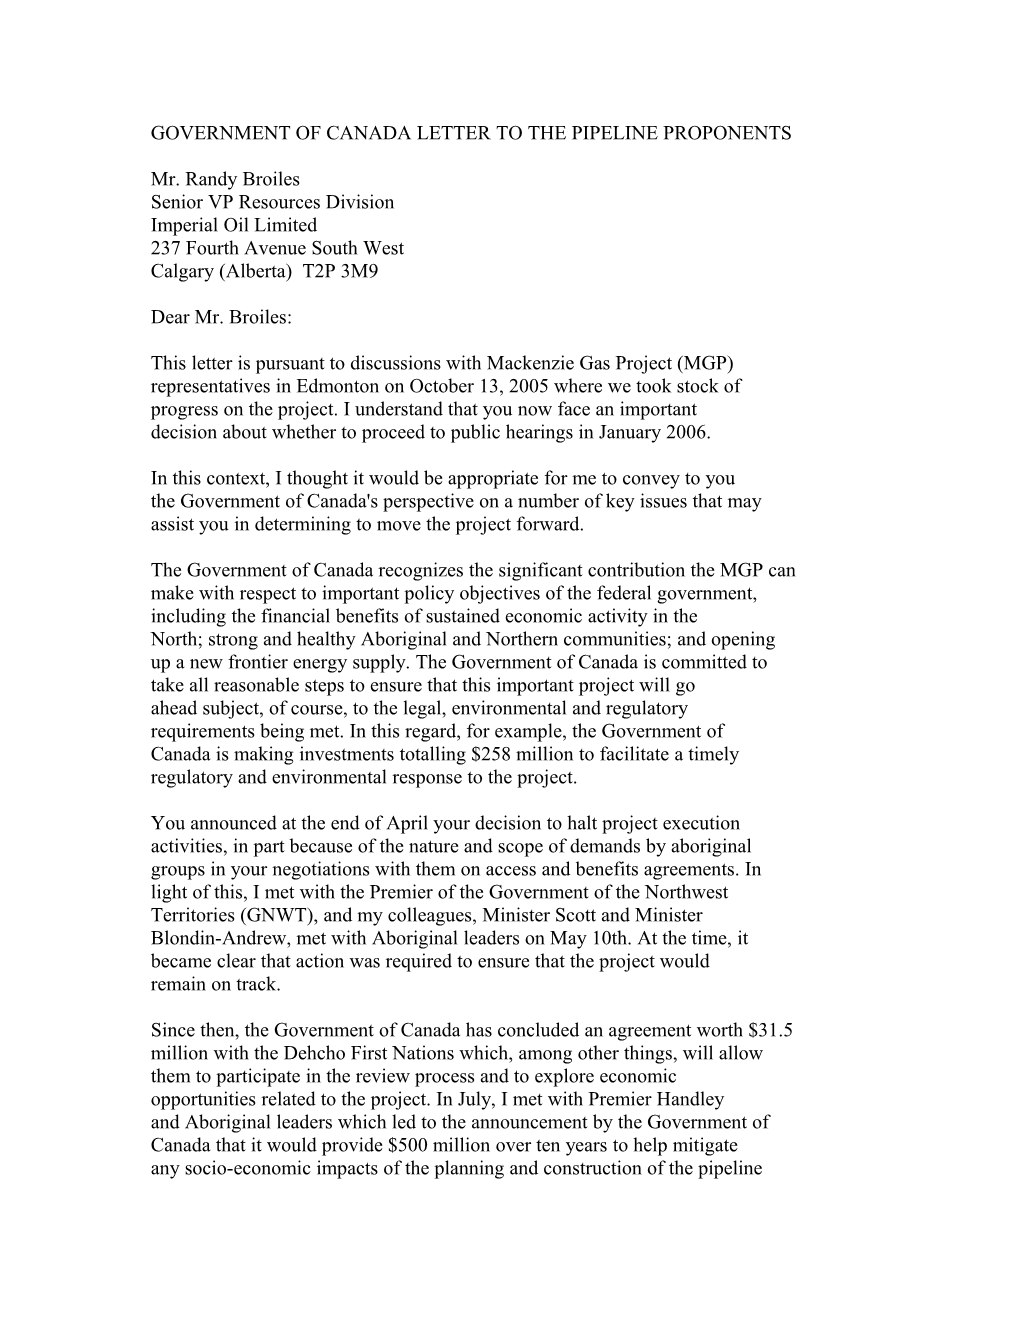 Government of Canada Letter to the Pipeline Proponents